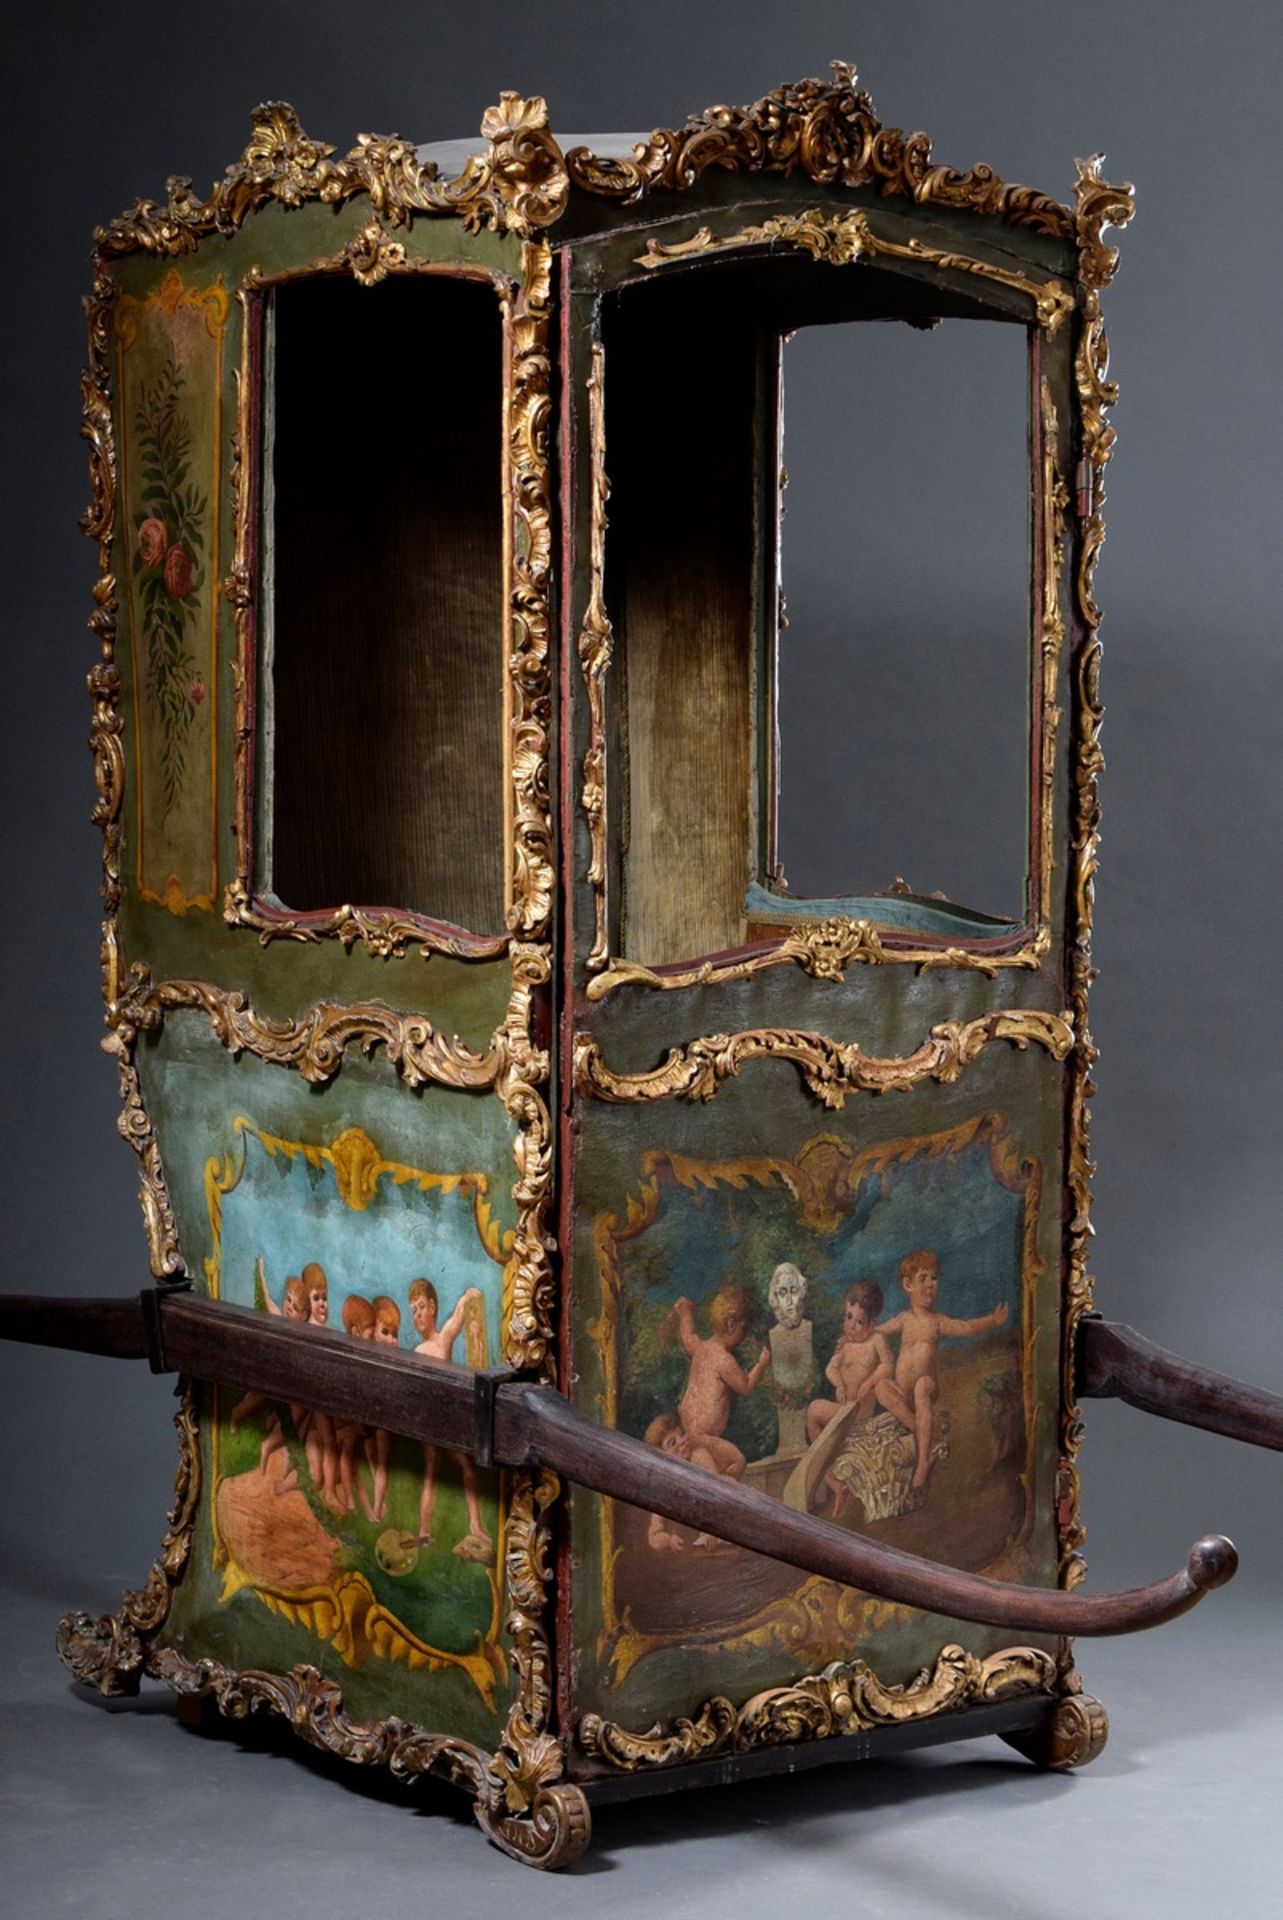 Rococo-style sedan chair with painted canvas covering "Putten-Allegorien" and carved rocaille mould